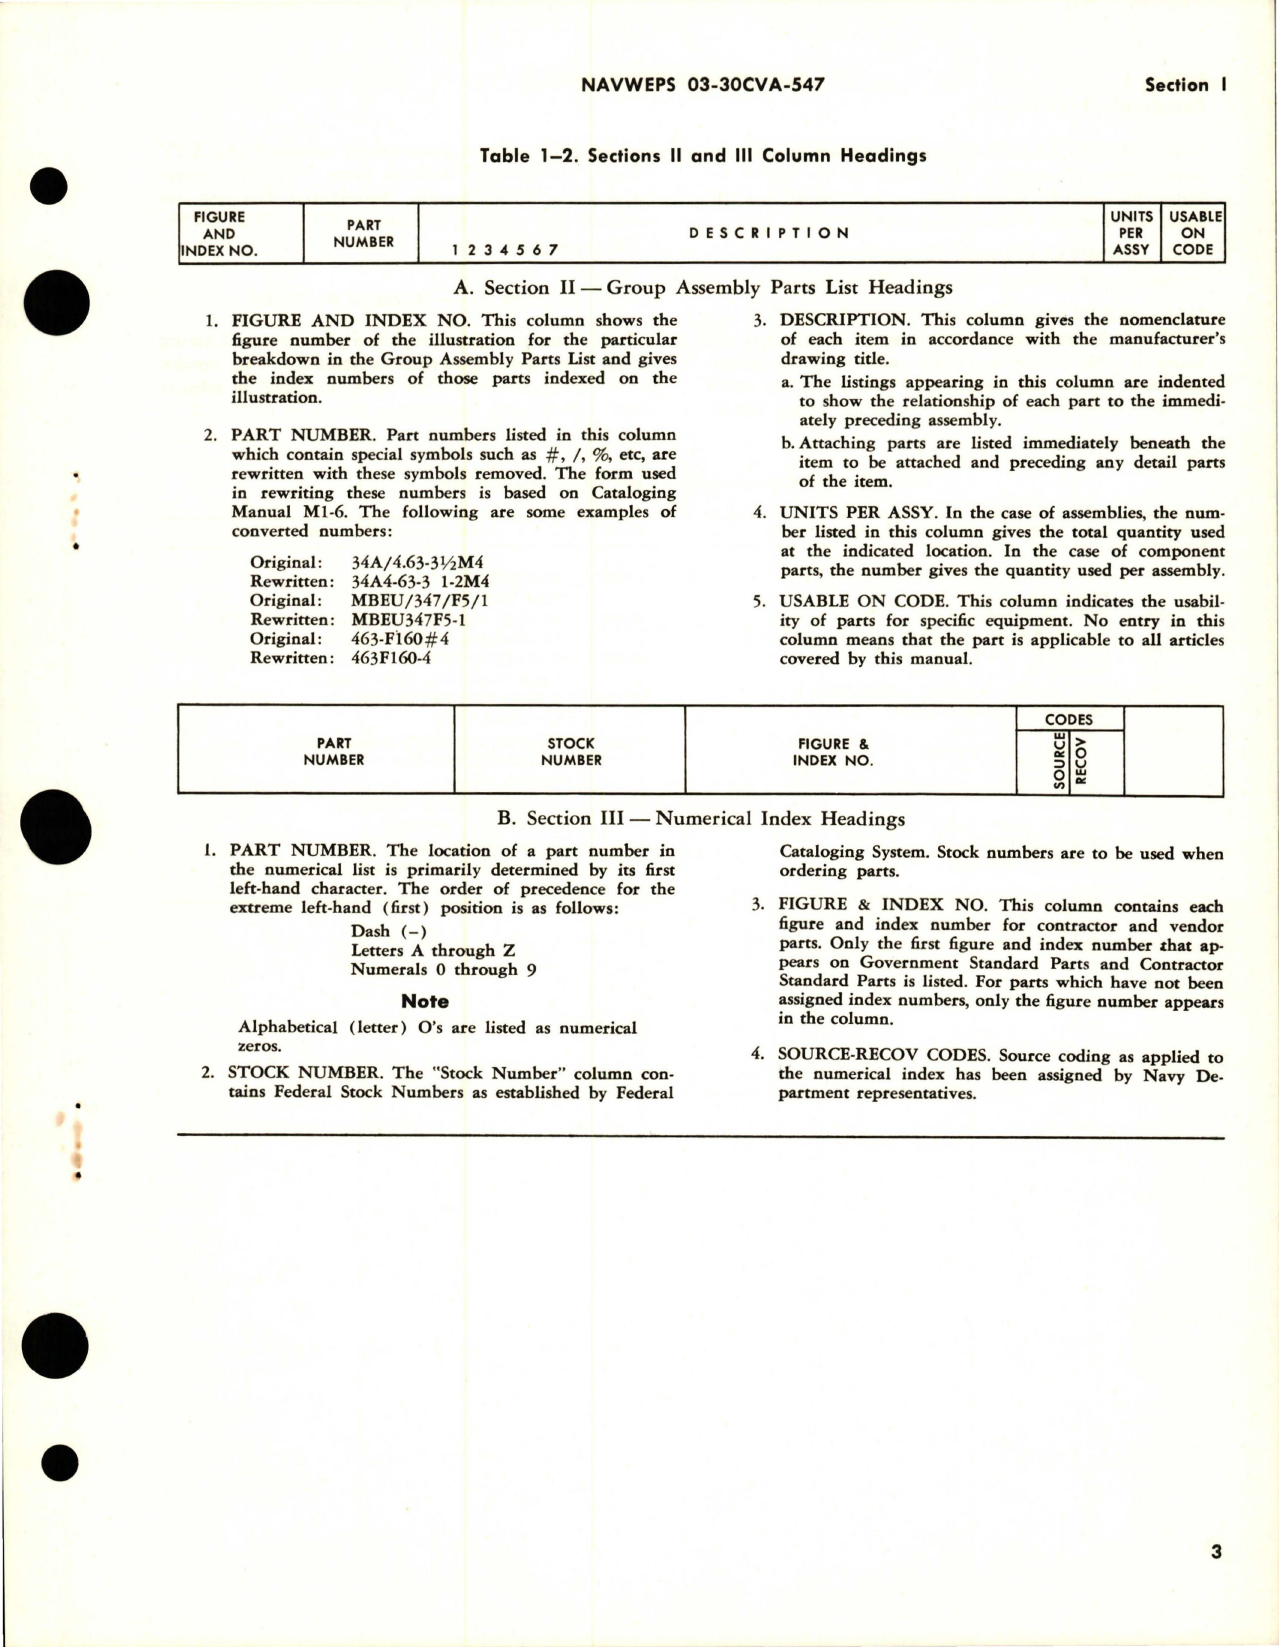 Sample page 5 from AirCorps Library document: Illustrated Parts Breakdown for Rudder Power Control, Cylinder and Valve Assembly, Rigging and Synchronization Fixtures